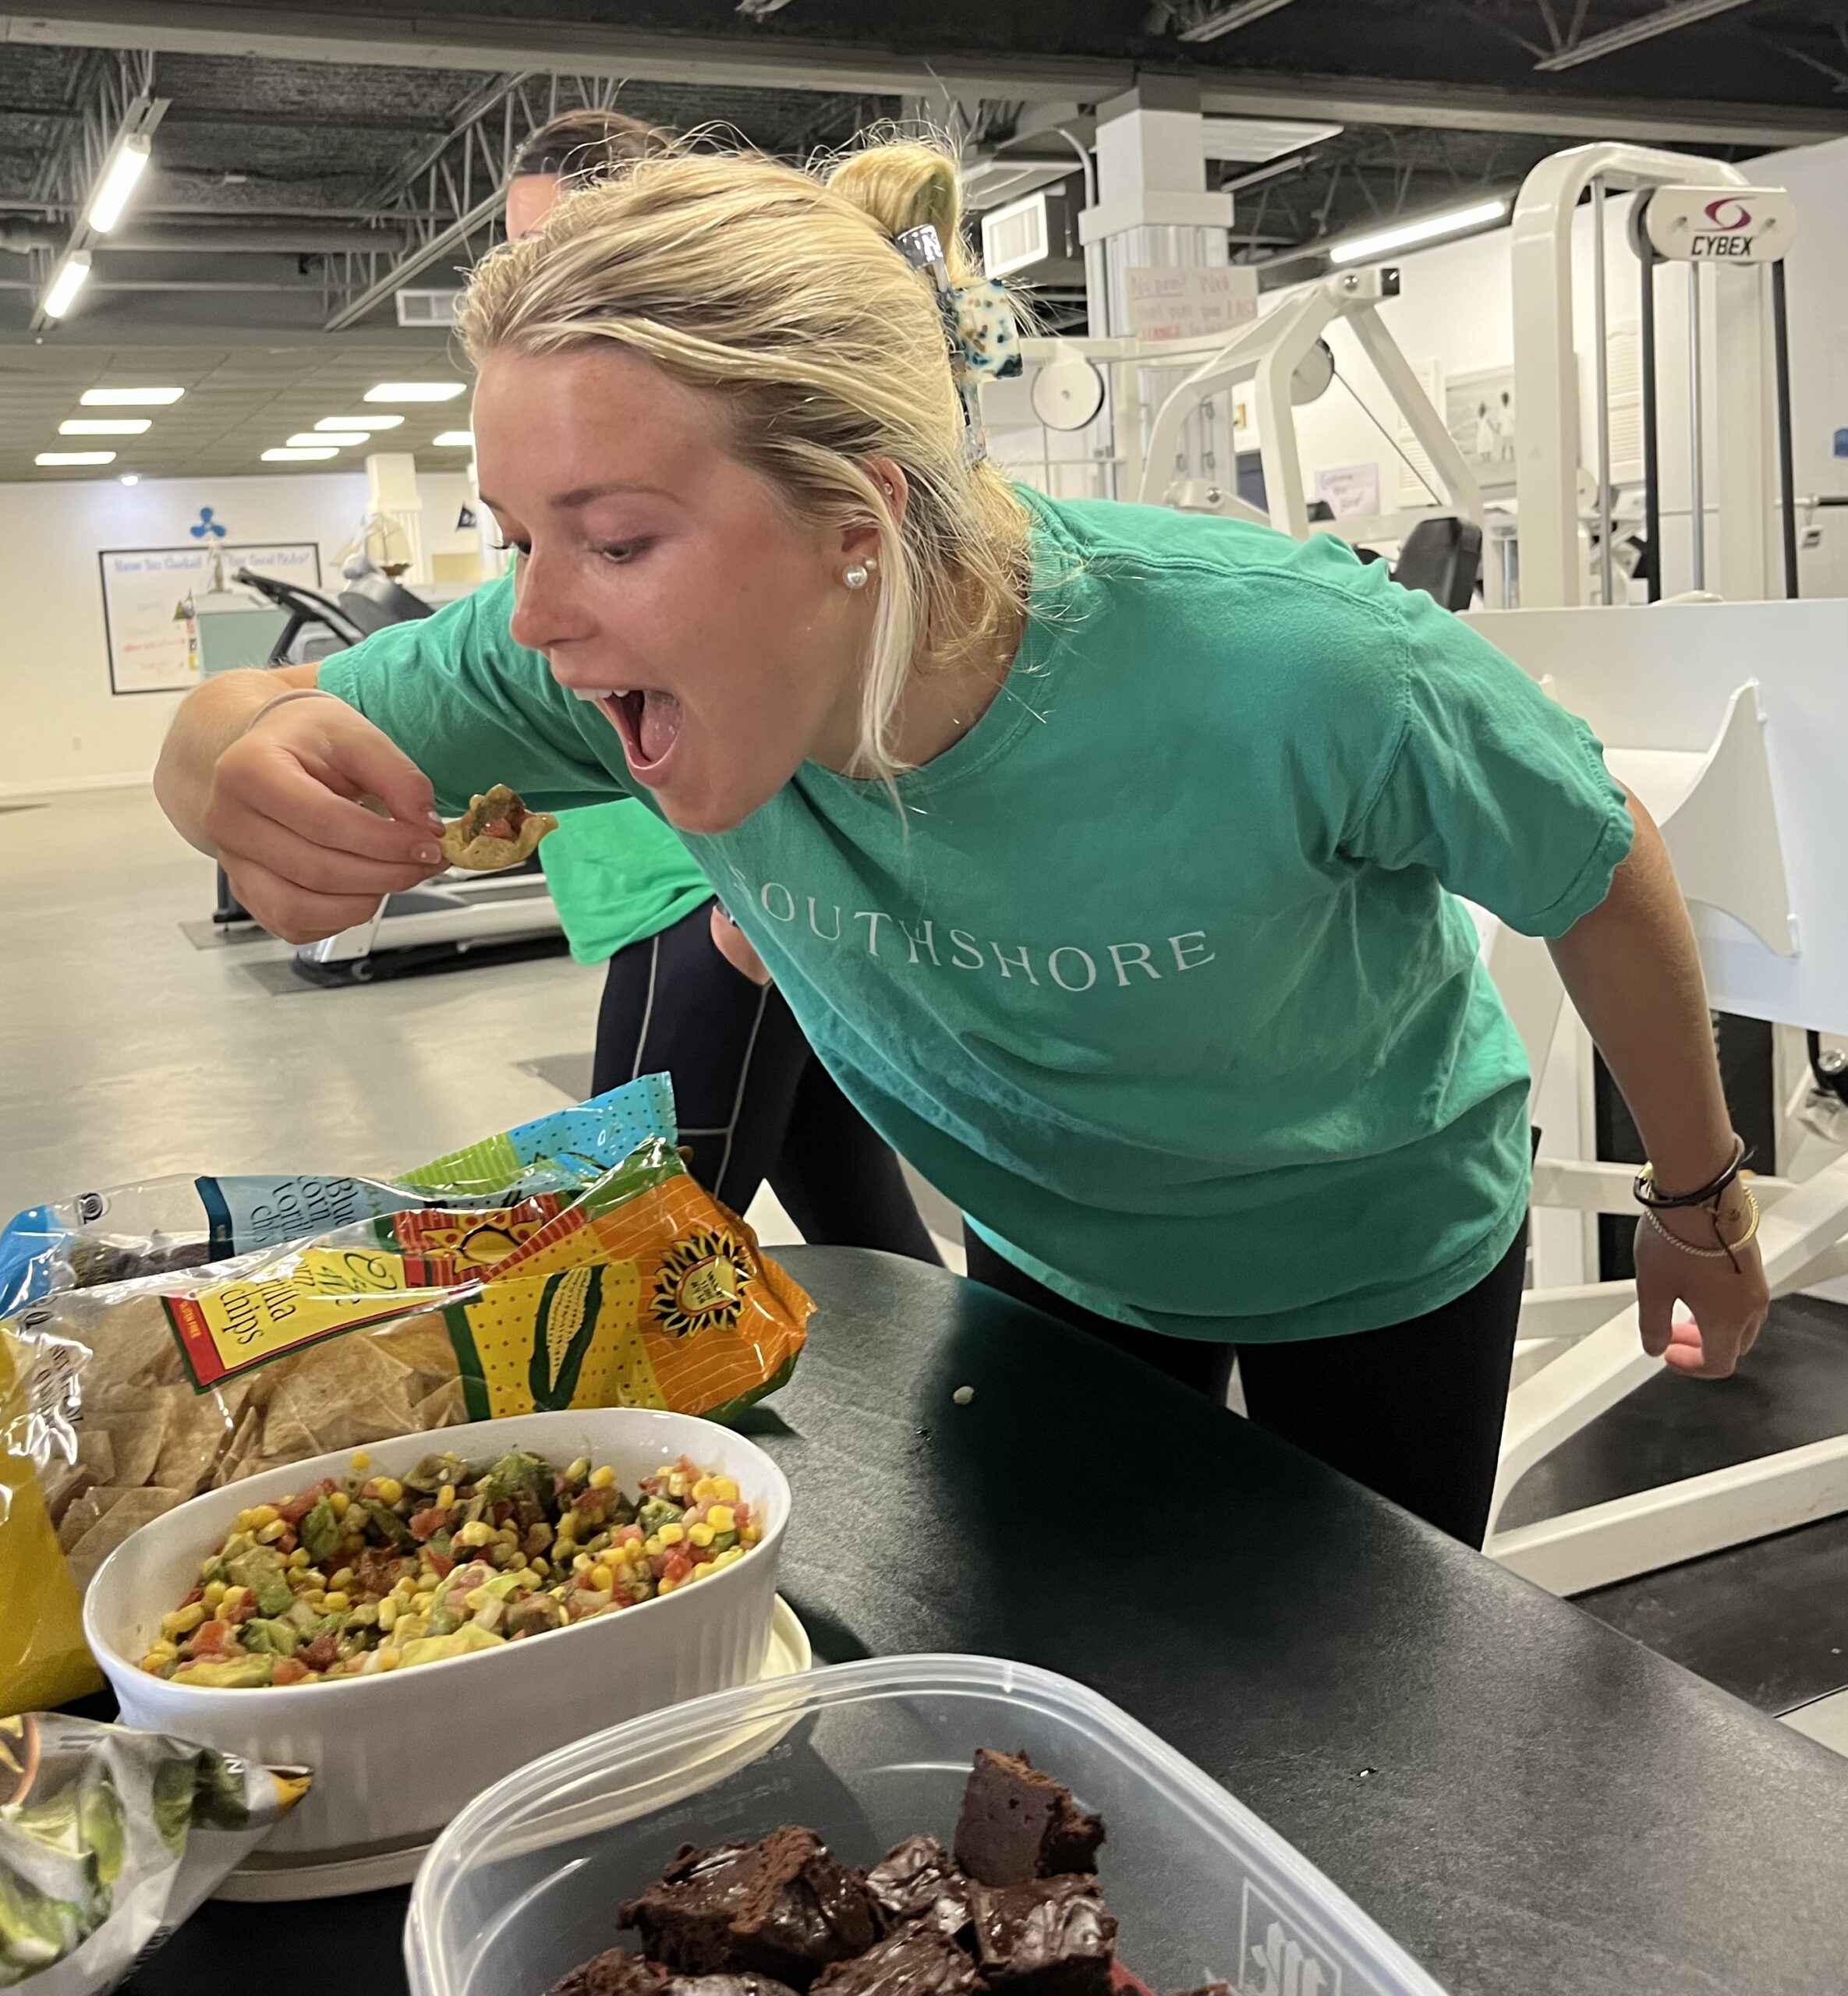 Southshore-Physical-Therapy_Metairie-Louisiana_National-Avocado-Day_green-clothes_smiling-girl-eating-avocado-dip_Brooke-Couret